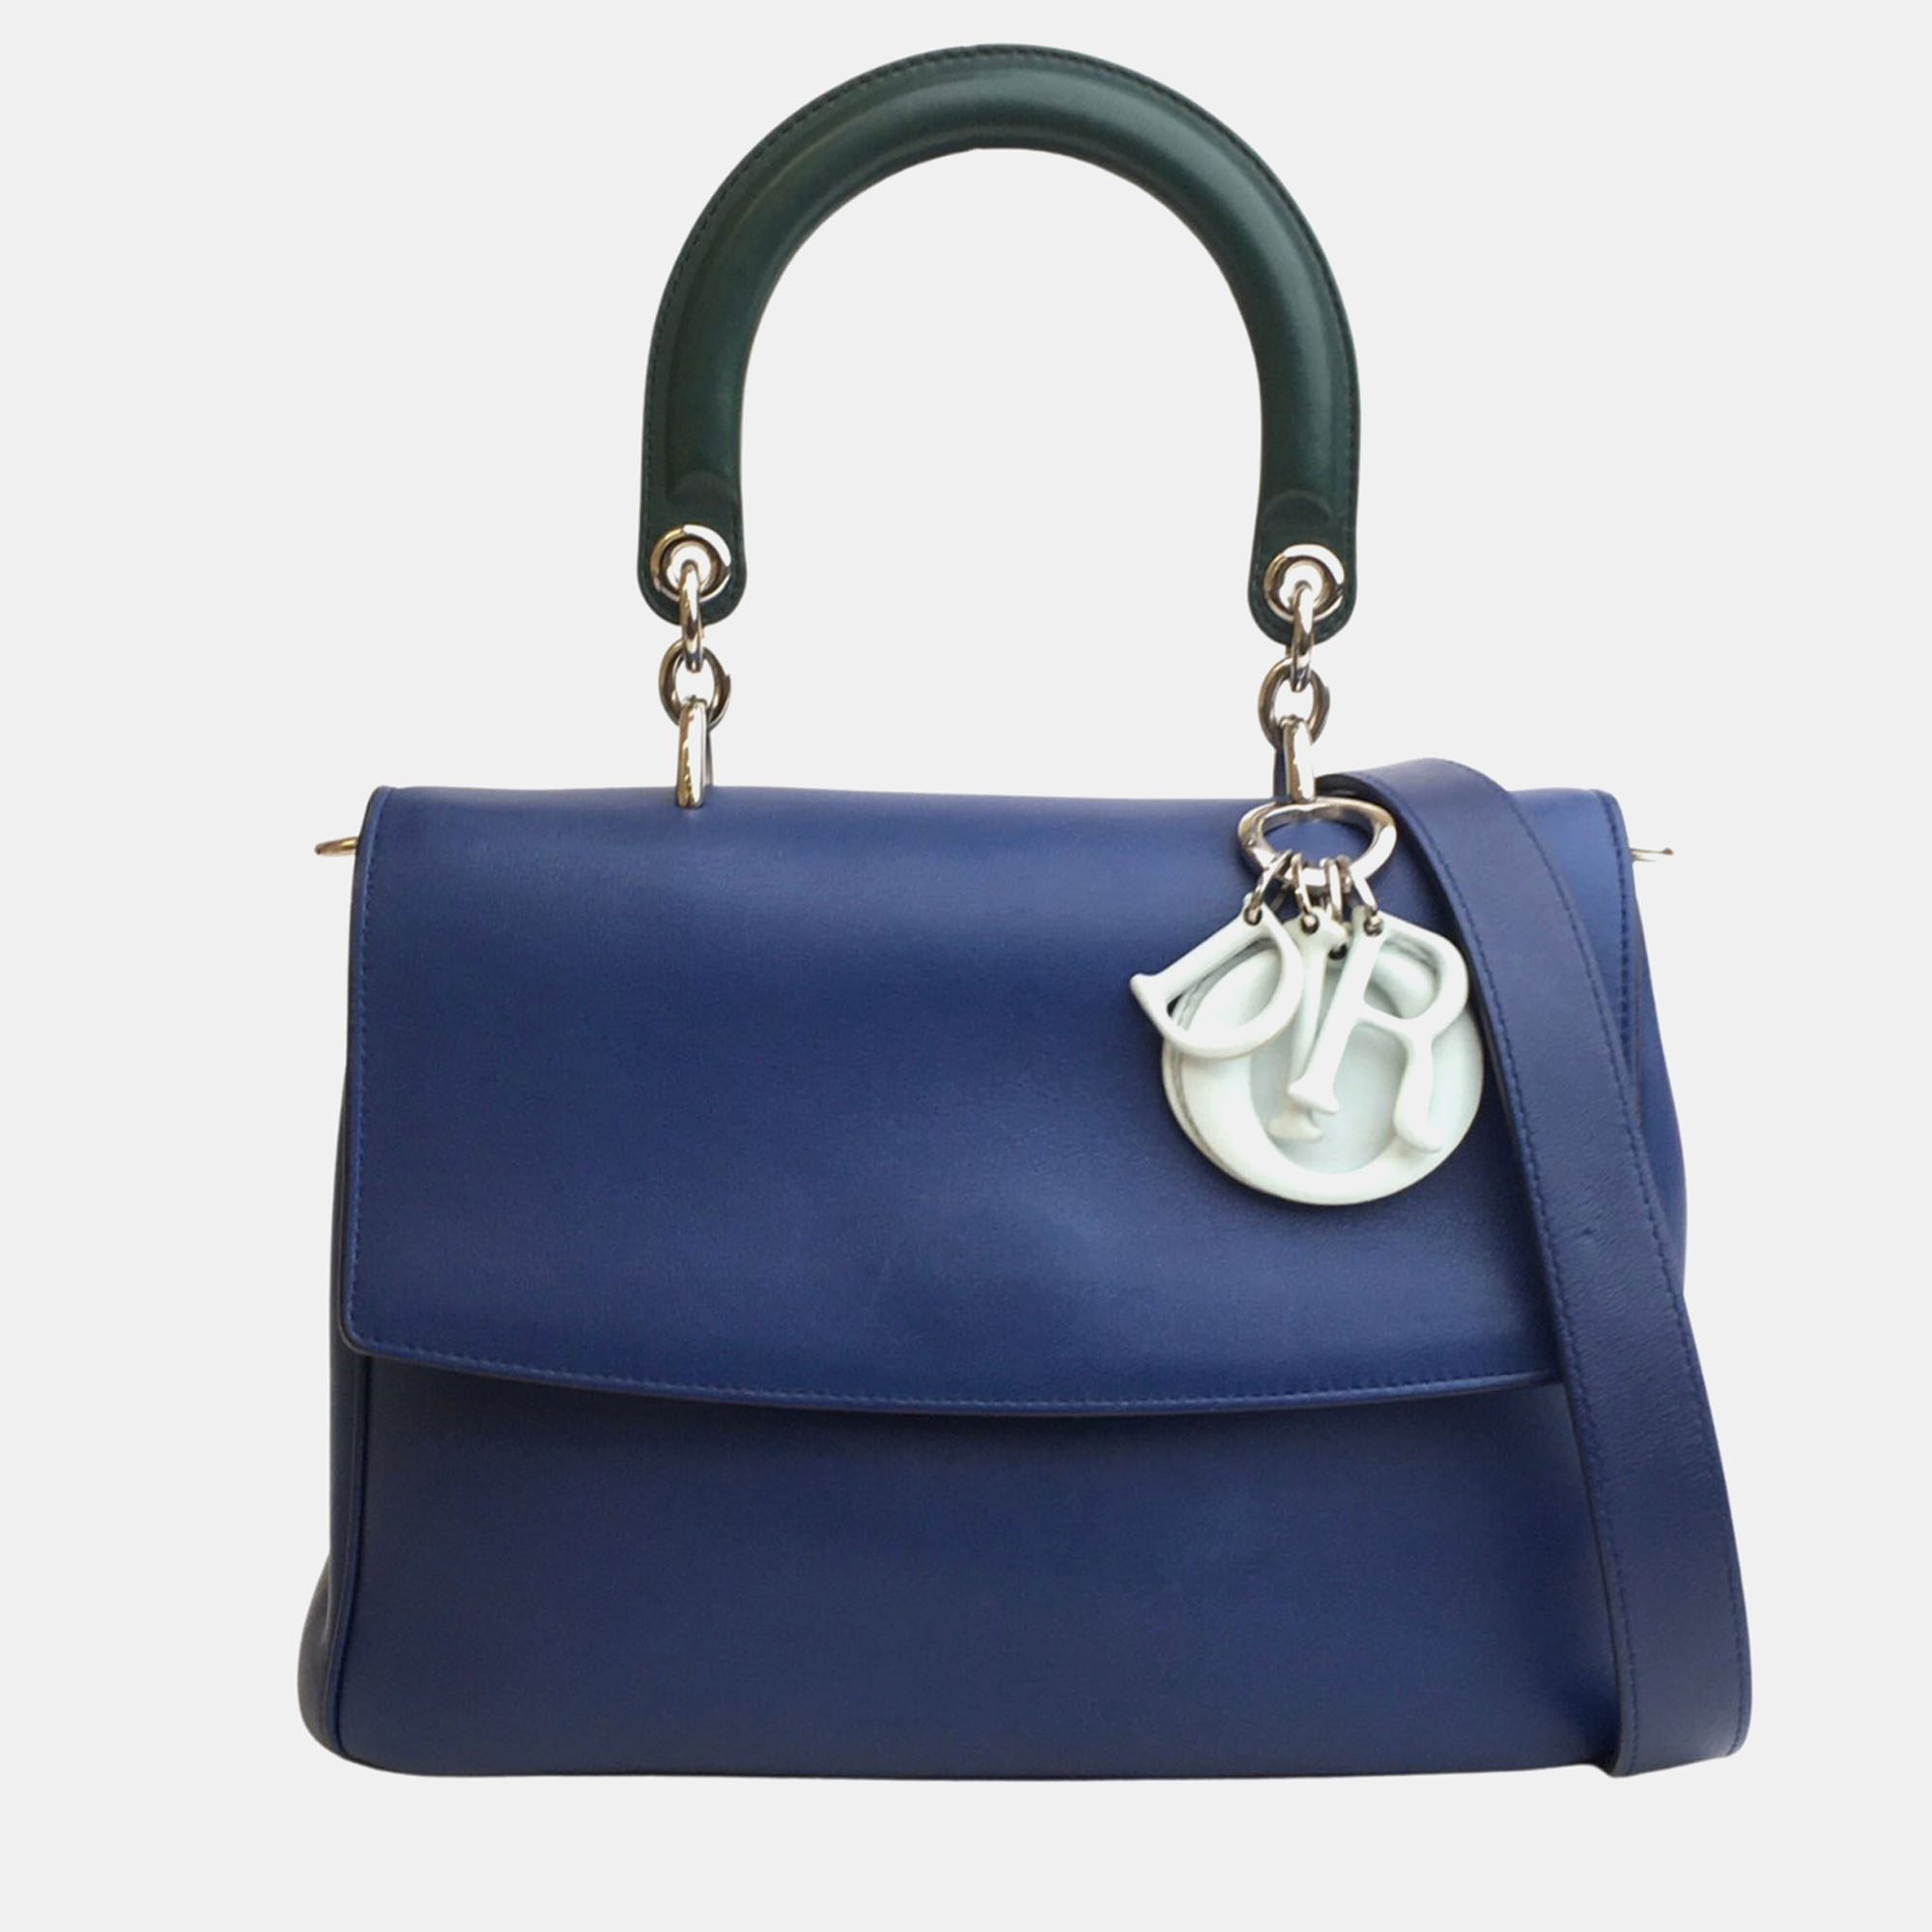 Dior blue leather small be dior top handle bag